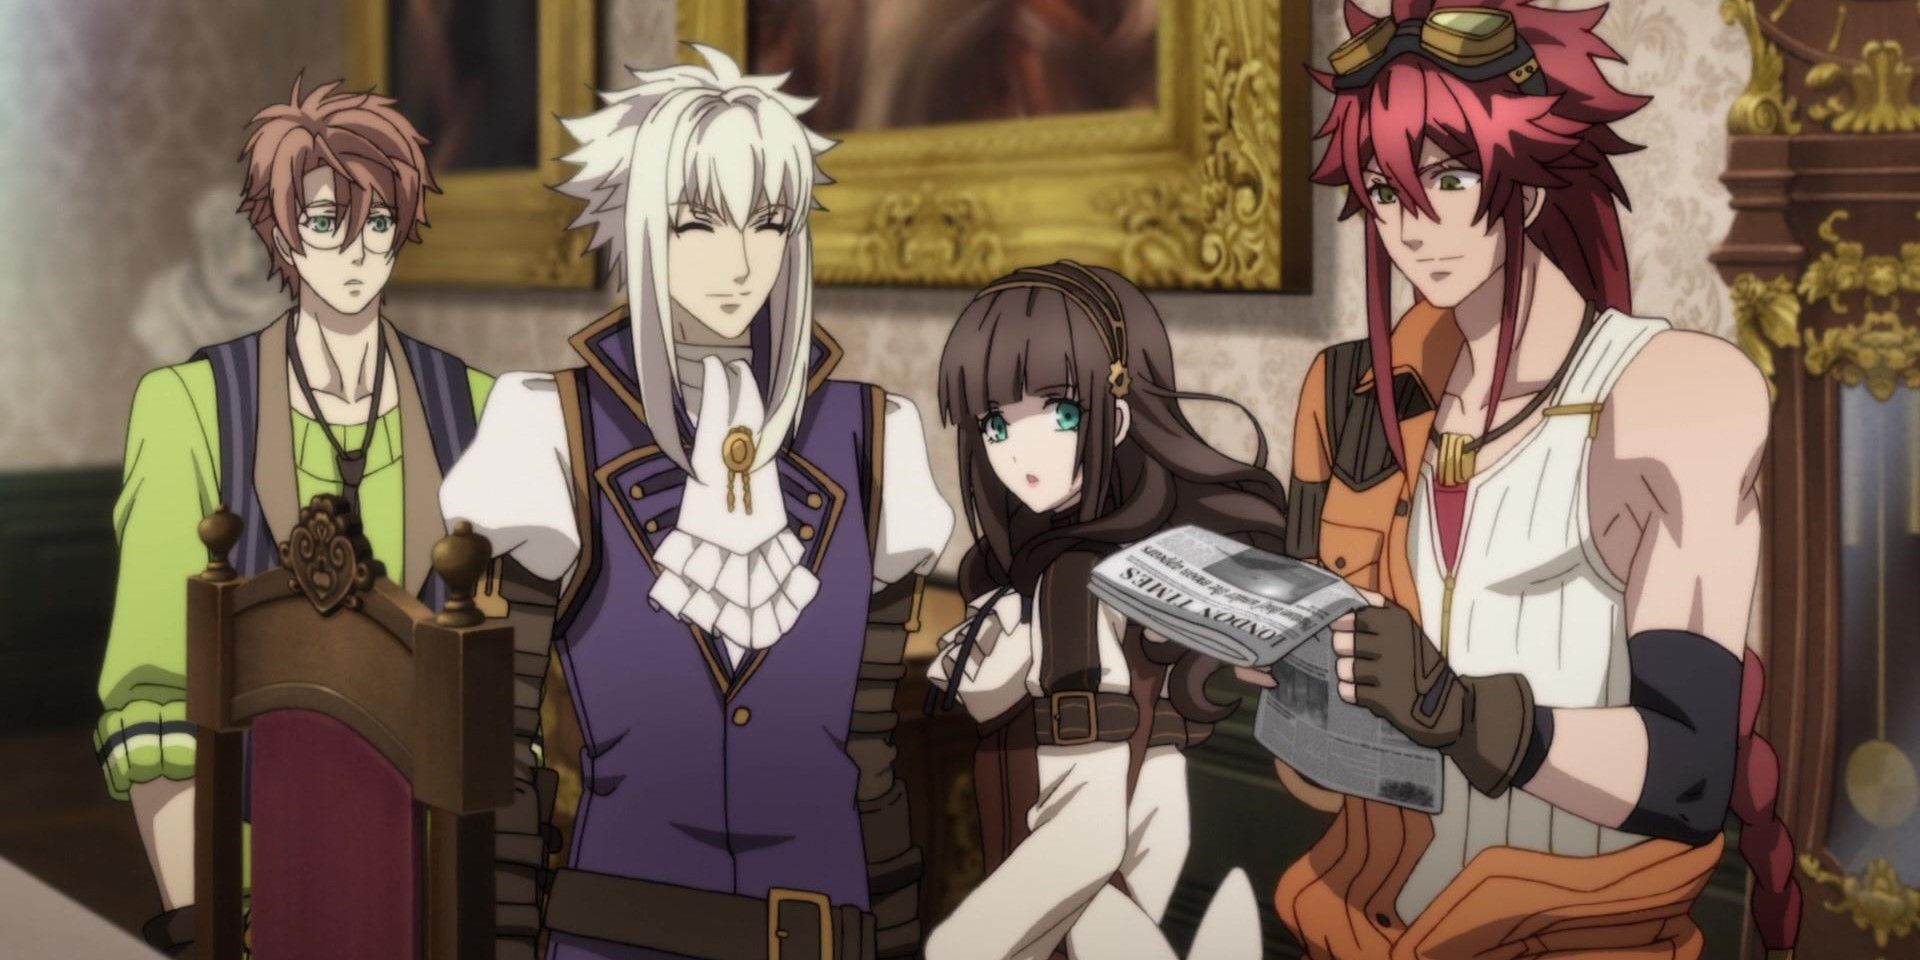 (from left to right) Victor Frankenstein, Saint-Germain, Cardia Beckford and Impey Barbicane from Code: Realize~Gaurdian of Rebirth~.